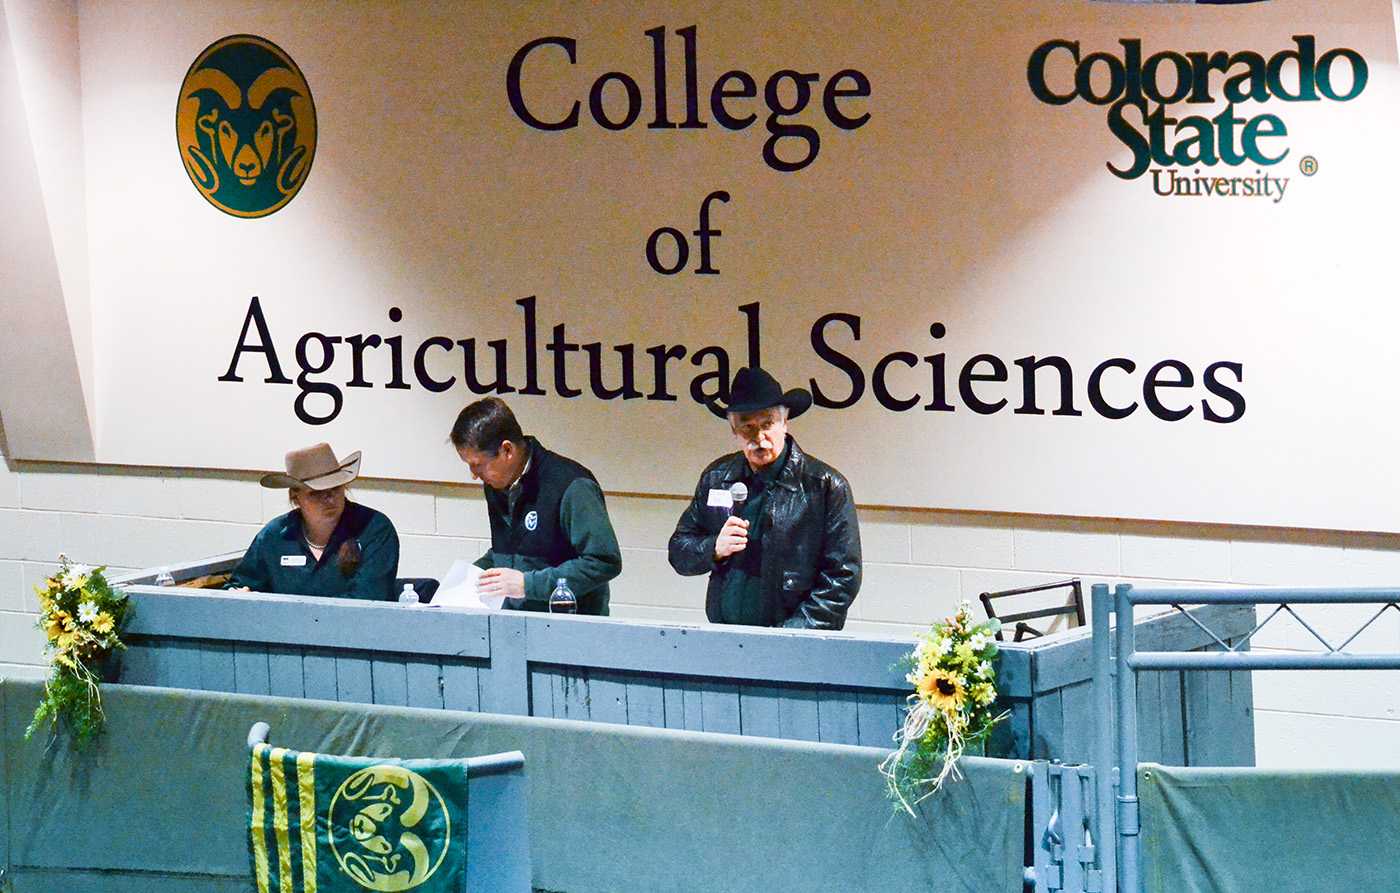 Dr. Kevin Pond, Head of the Animal Sciences Department, welcomed buyers and spectators to CSU's 38th Annual Bull Sale. Photo credit Dixie Crowe.